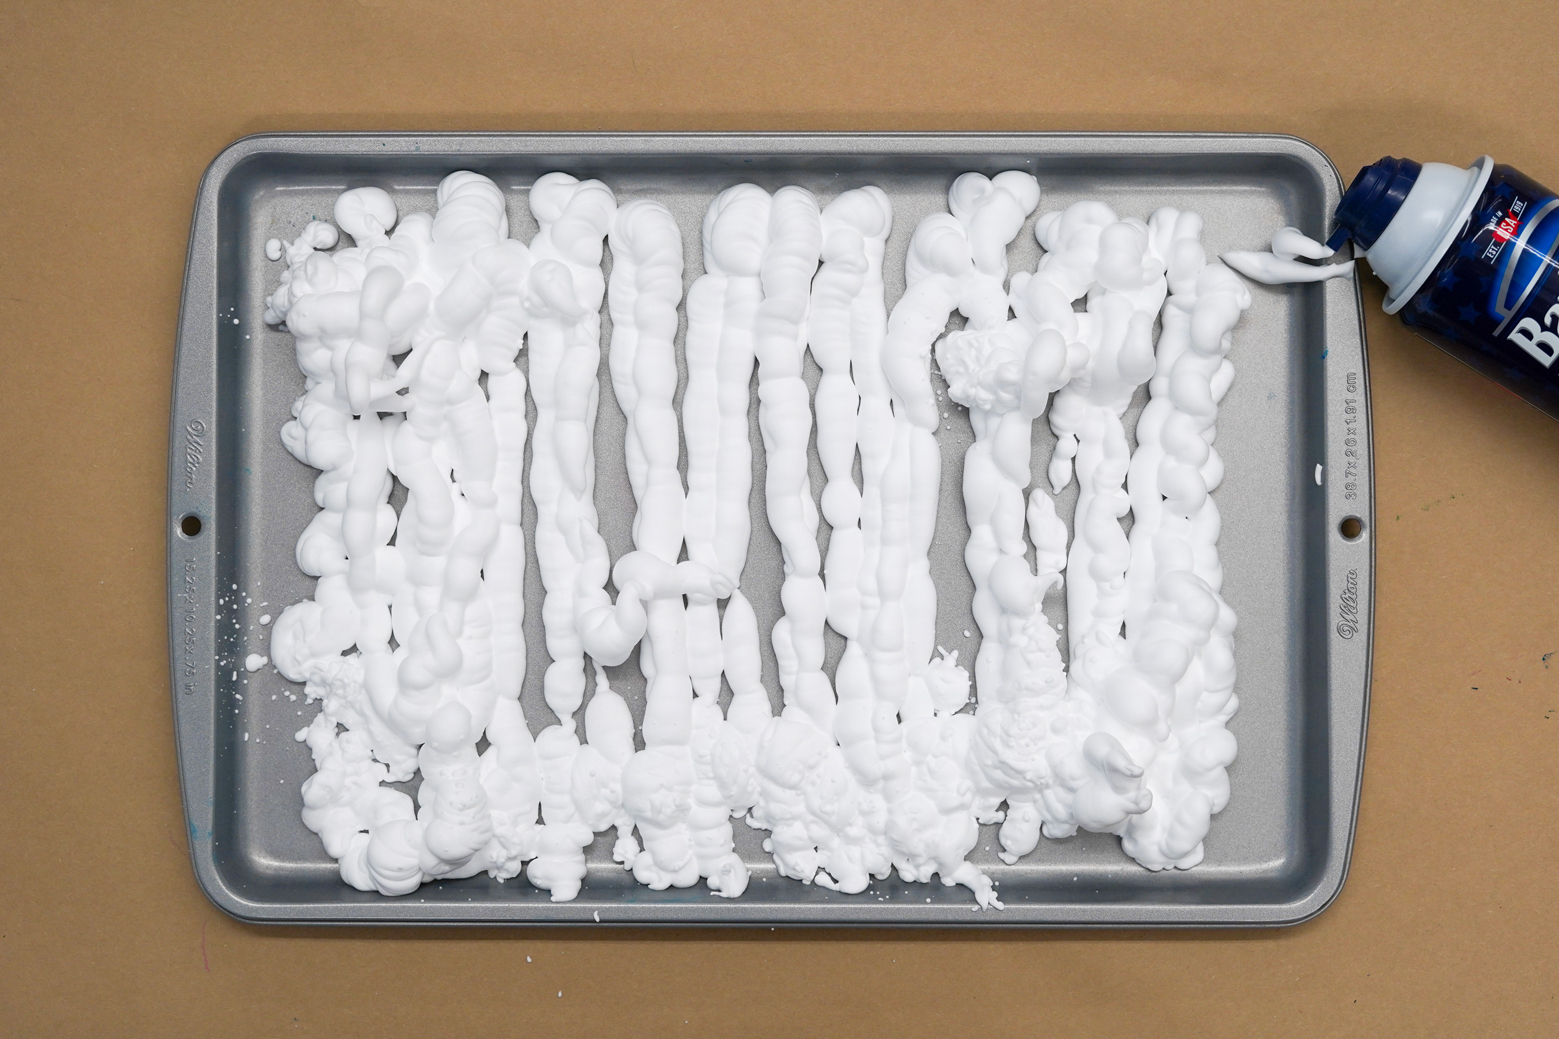 Photo of a baking sheet with shaving cream sprayed in rows over it